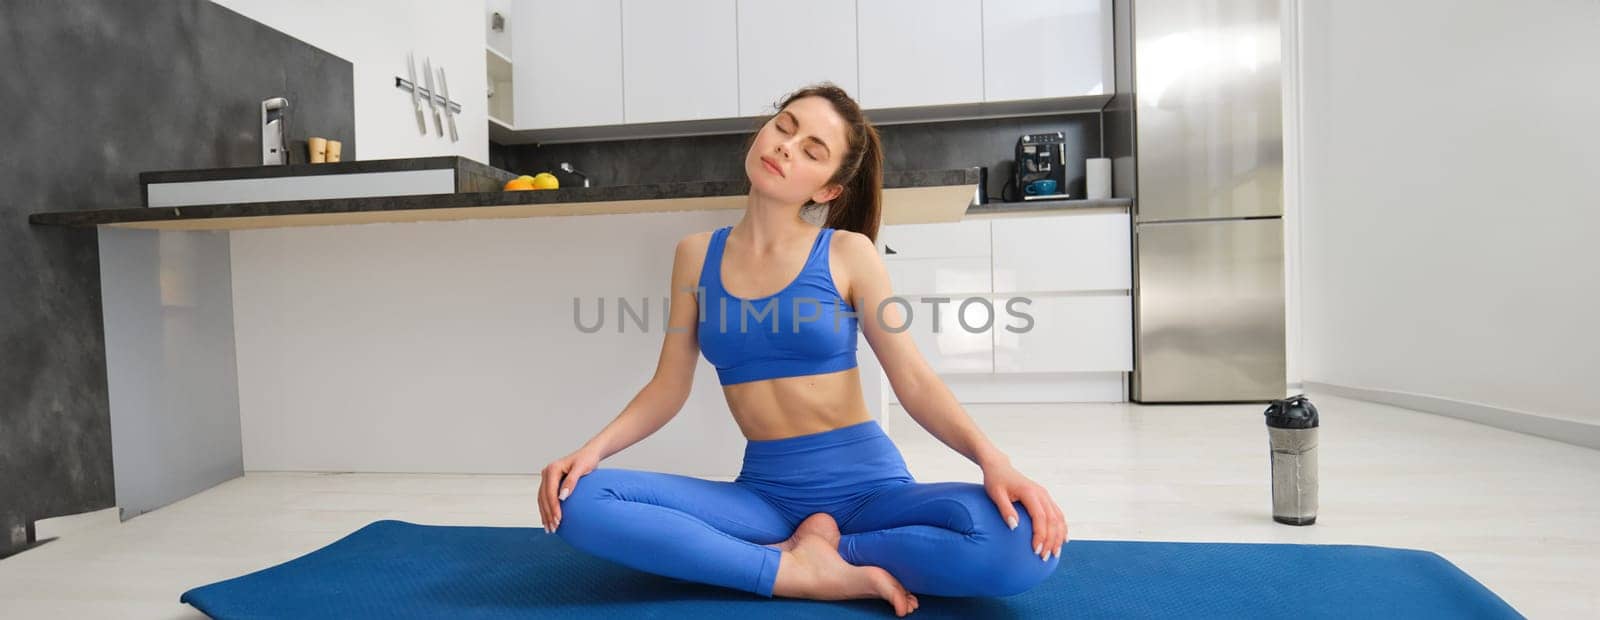 Portrait of young sportswoman, stretching her neck, warm-up before yoga exercises, doing fitness workout on rubber mat, wearing blue sportsbra and leggings.